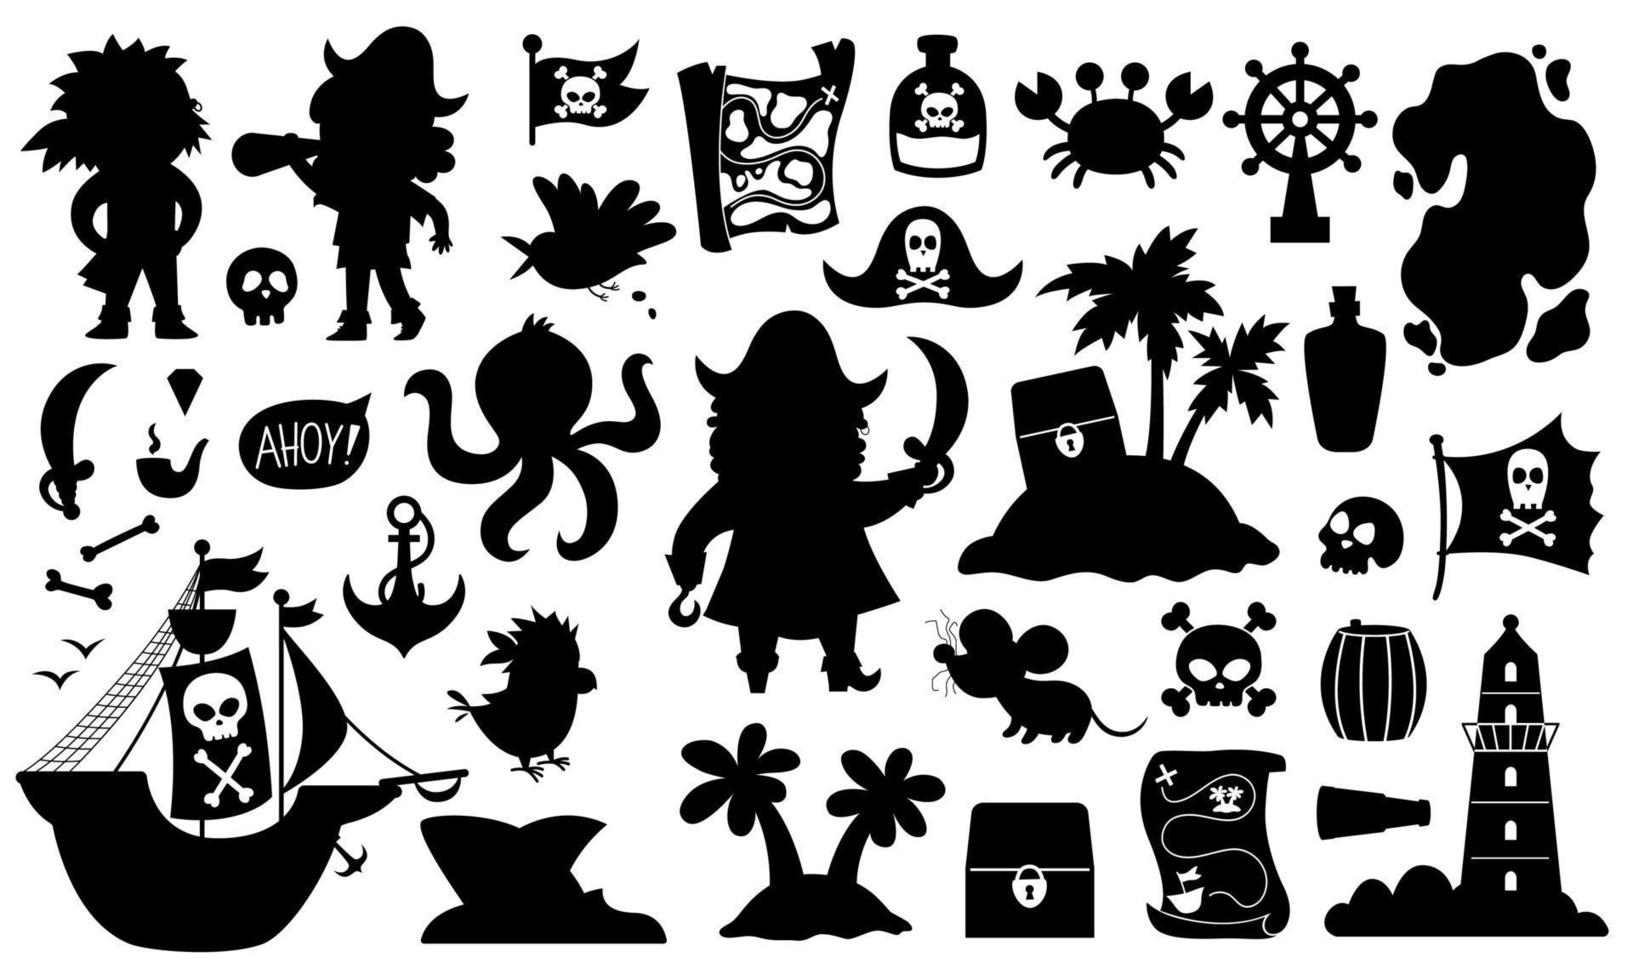 Vector pirate silhouettes set. Cute sea adventures black icons collection. Treasure island shadow illustrations with ship, captain, sailors, chest, map, parrot, map. Funny pirate party elements